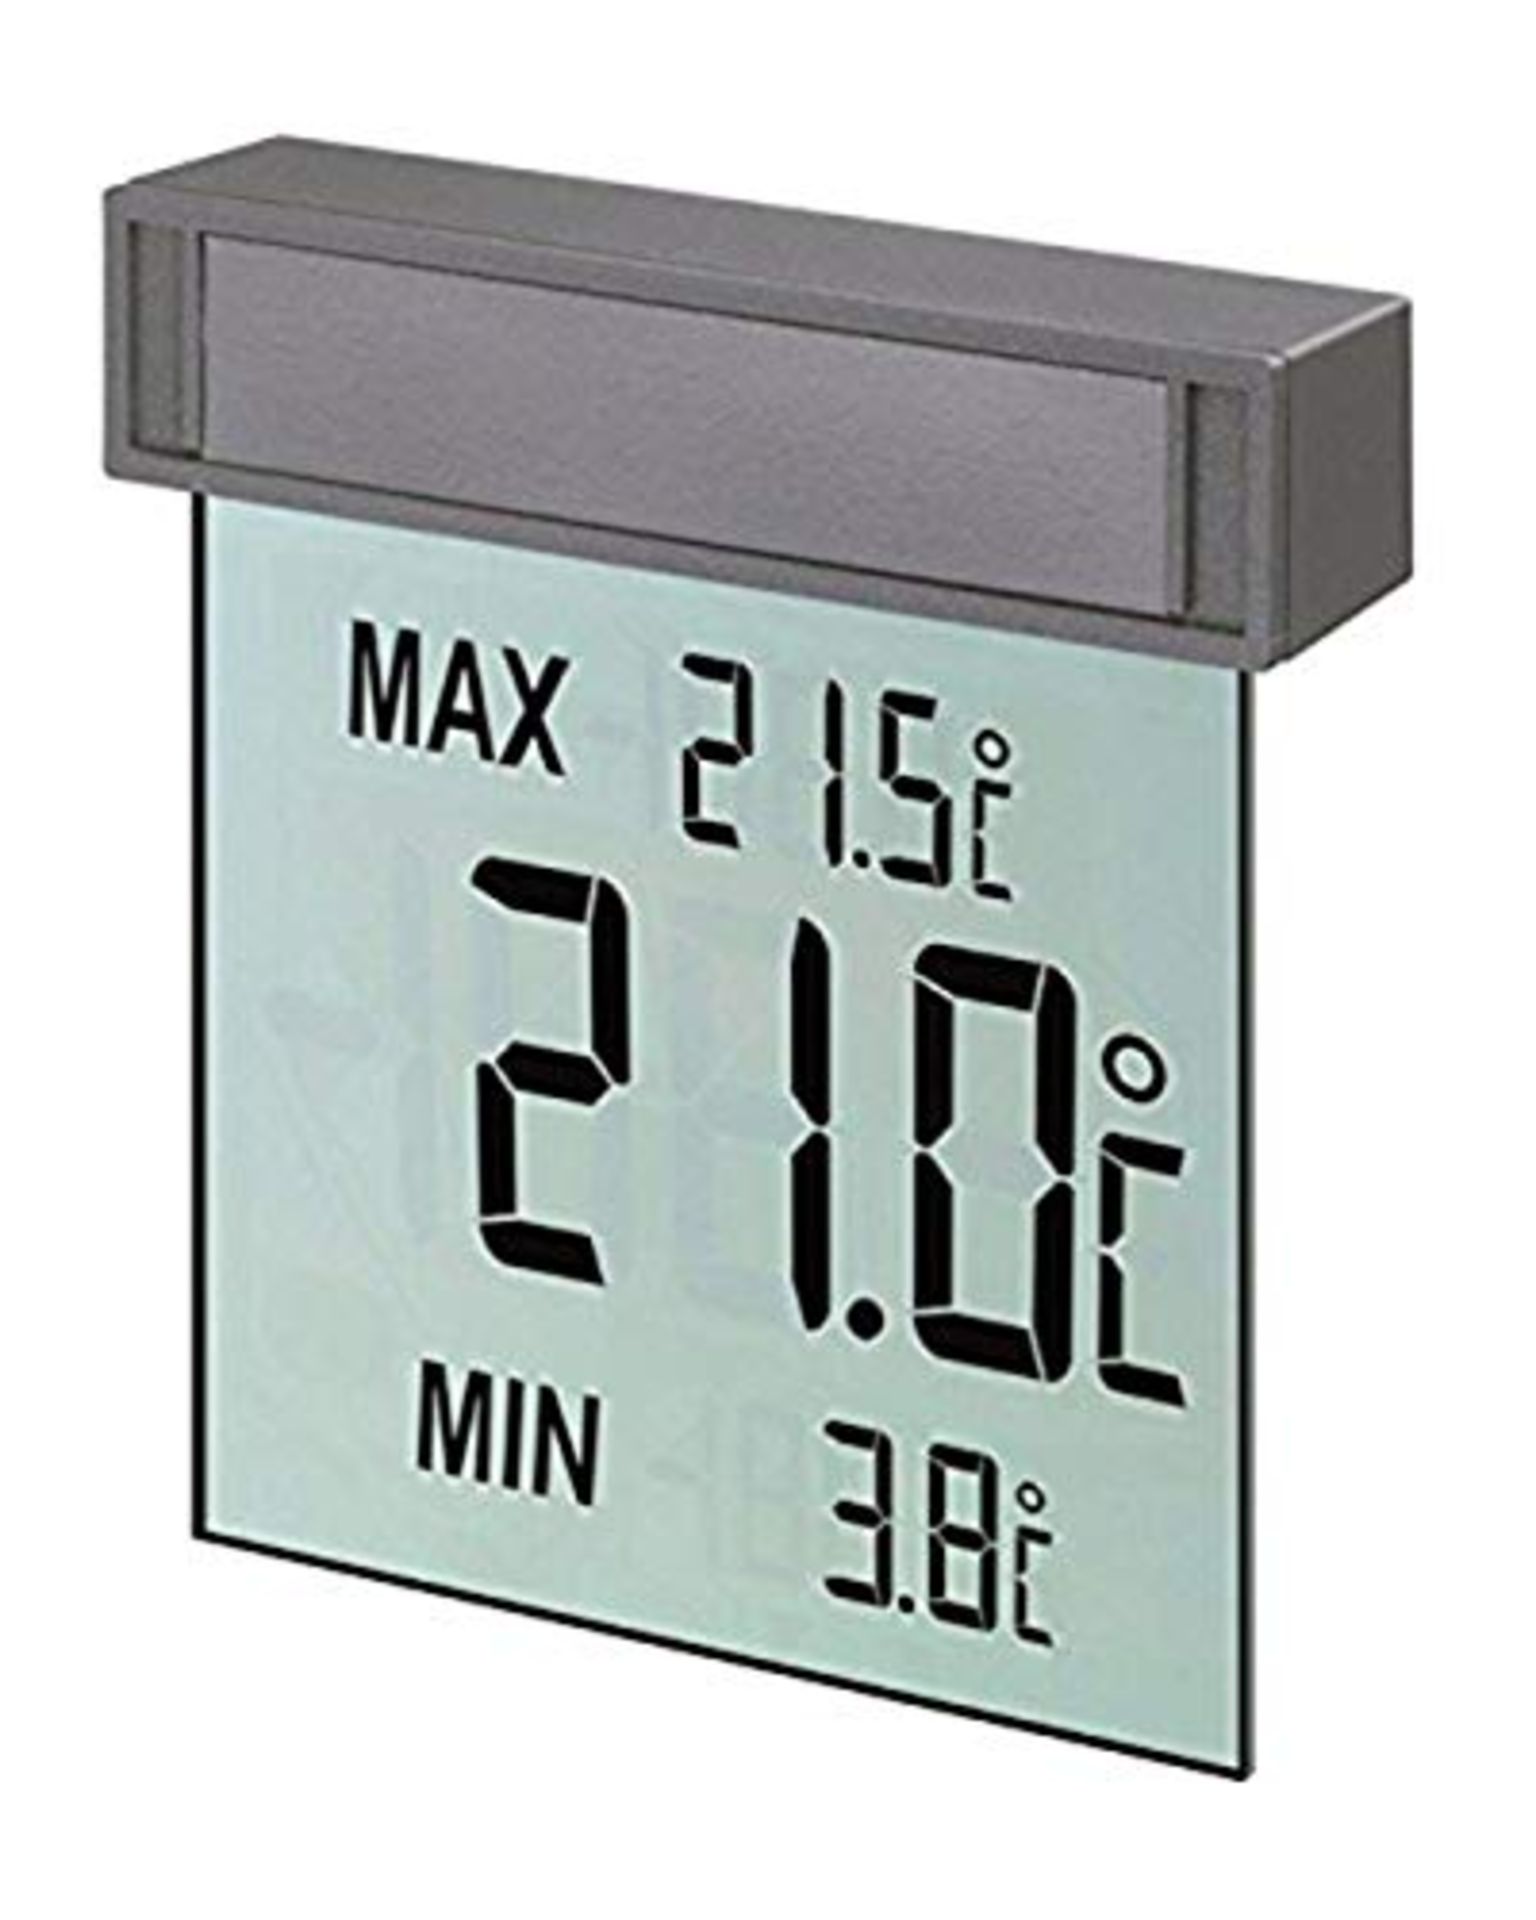 TFA Dostmann Vision Digital Window Thermometer, 30.1025, large display with outside te